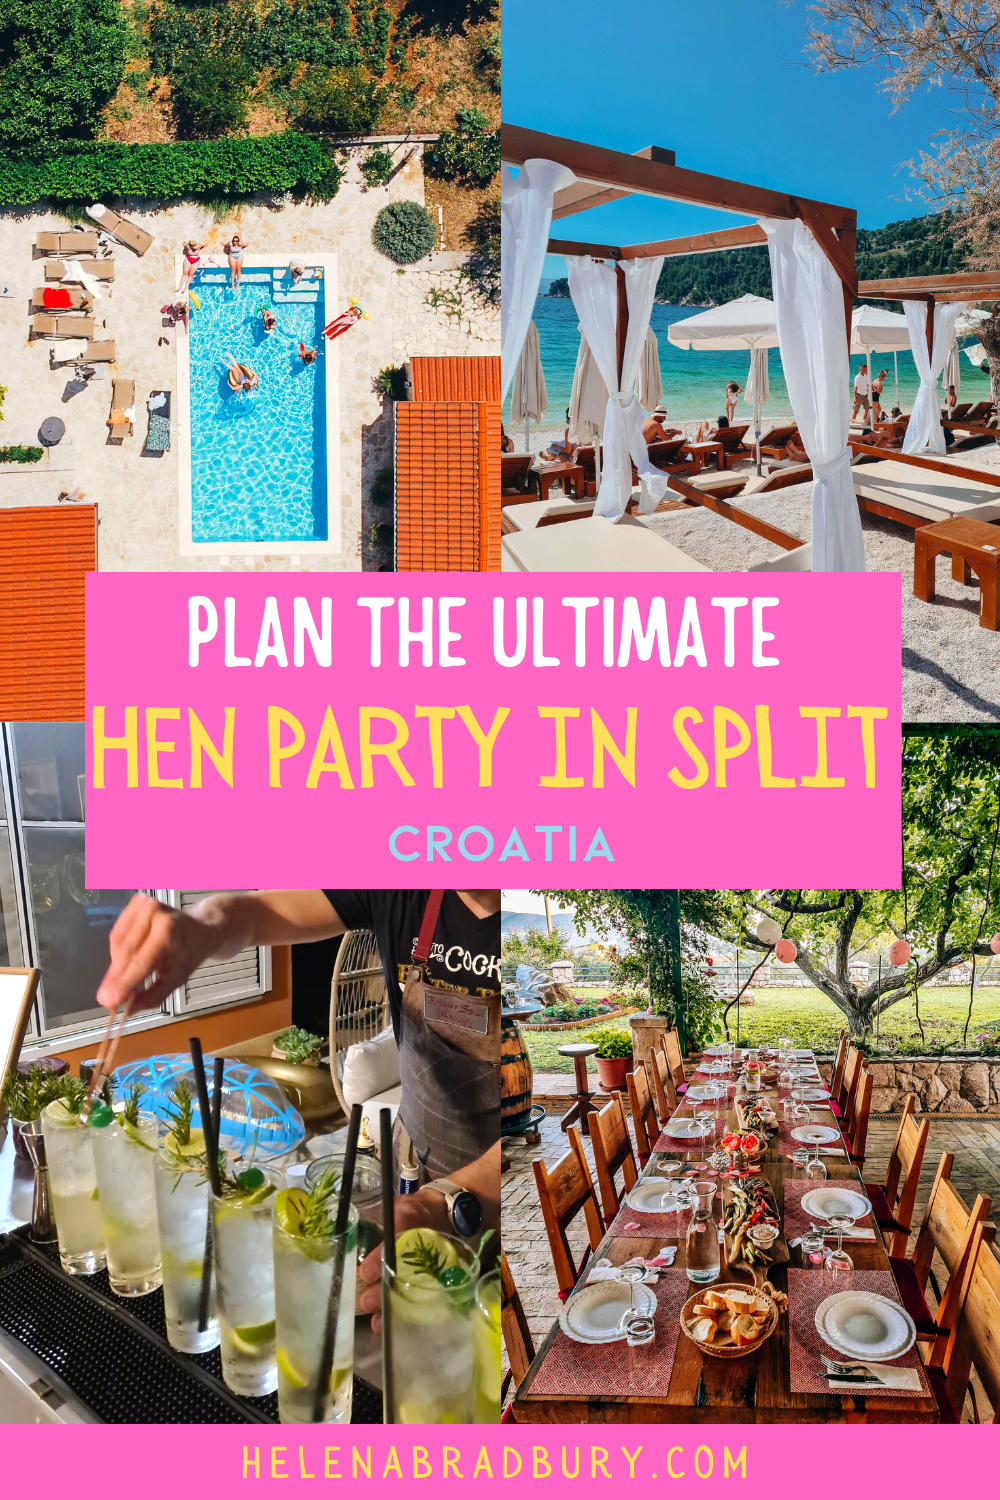 Did someone say hen party in Split? Best idea ever! Find the best hen do activities, parties, villas and hen party planning tips for the best girls trip to Split, Croatia! | split hen do | croatia hen party | split croatia hen do | hen do destination